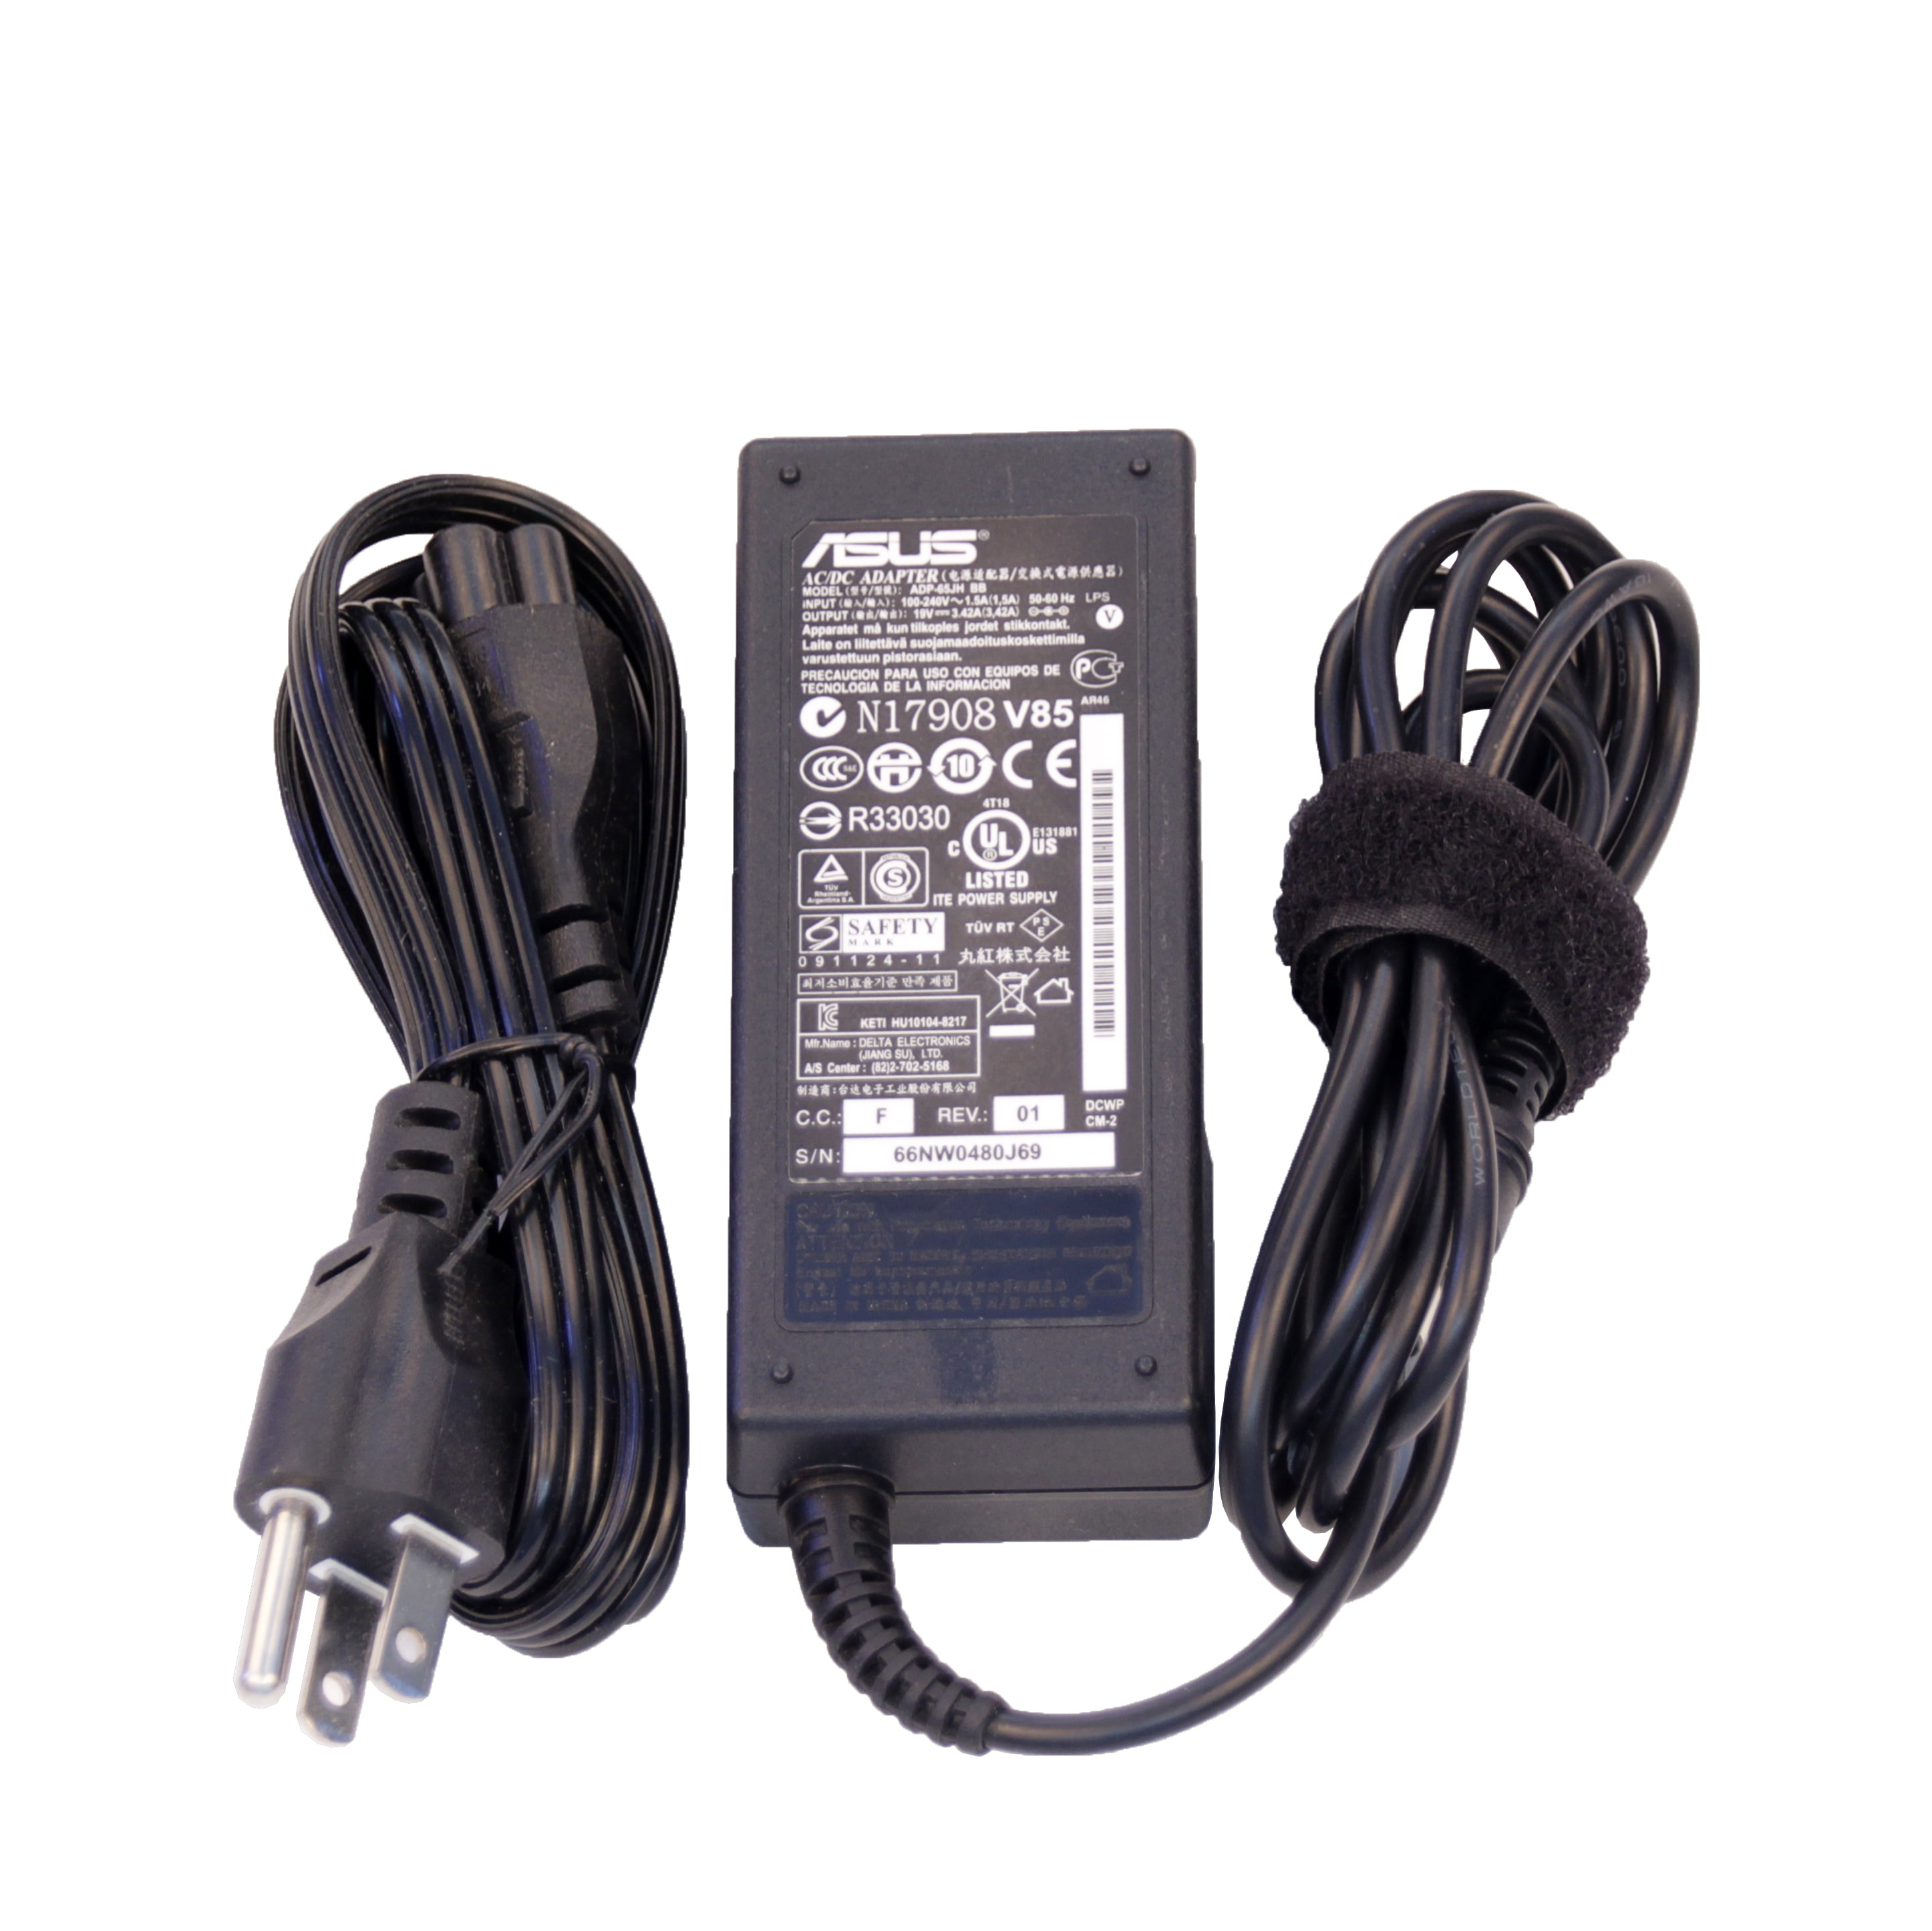 Genuine Original Charger Ac Power Adapter Supply Cable for Asus Notebook Laptop 